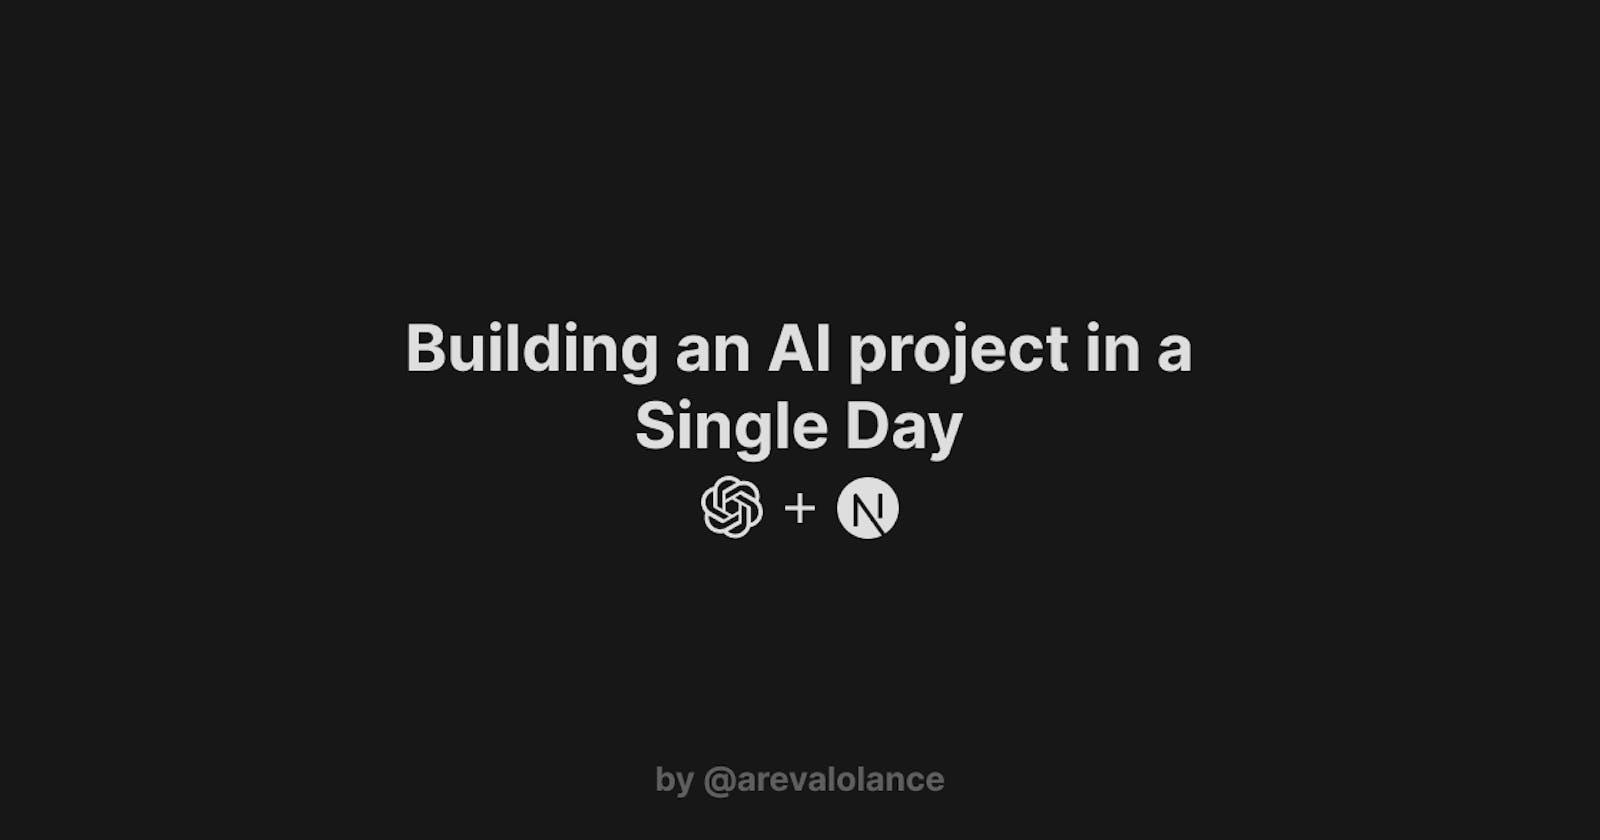 Building an AI project in a Single Day